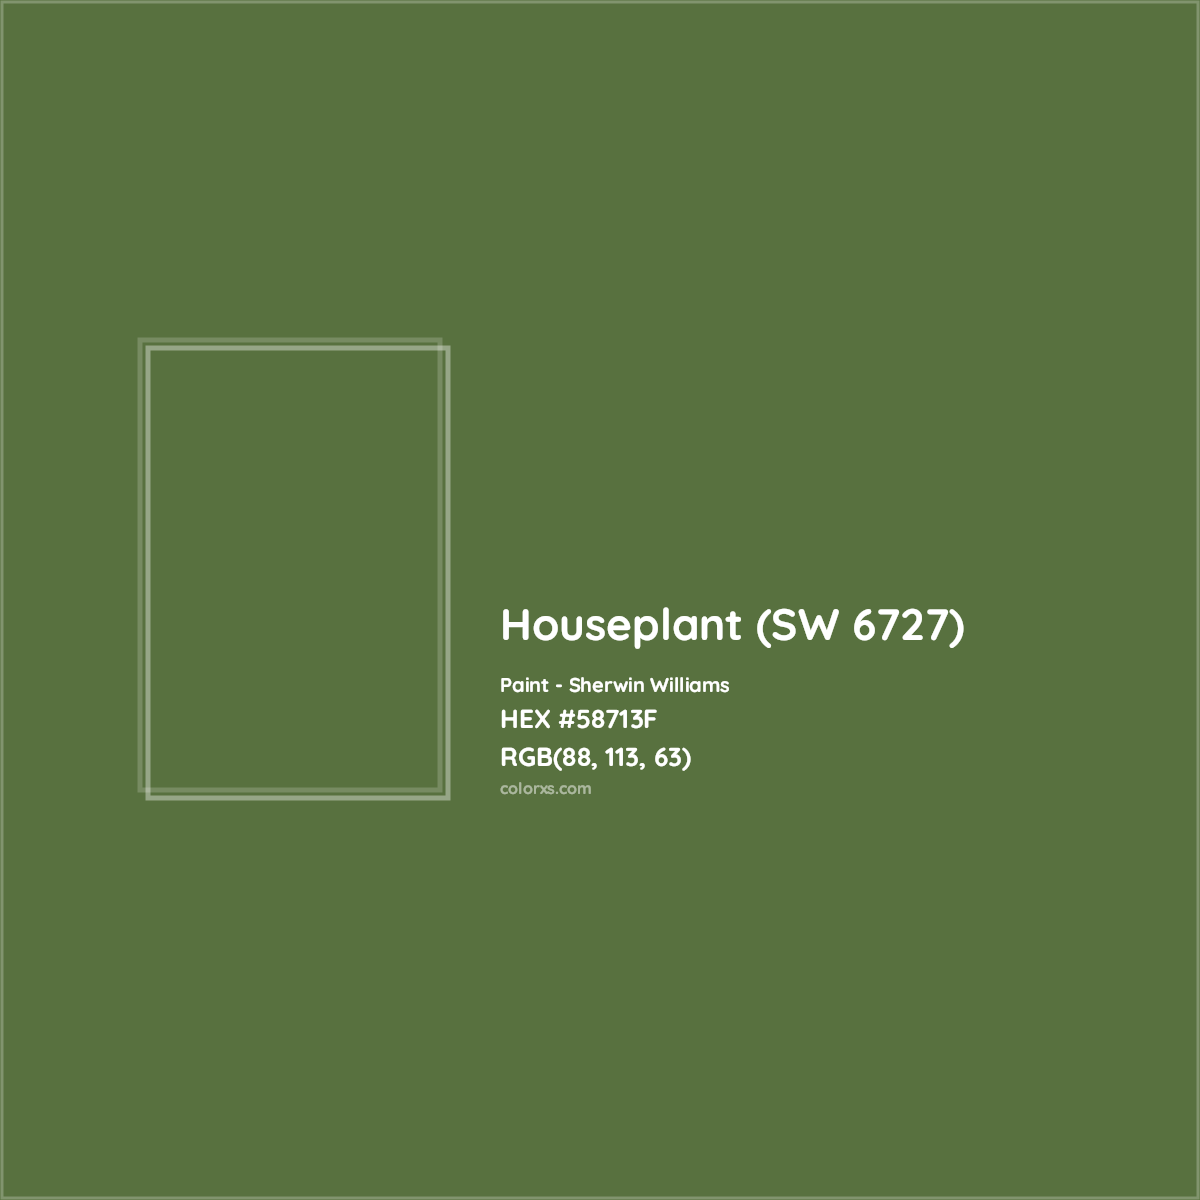 HEX #58713F Houseplant (SW 6727) Paint Sherwin Williams - Color Code